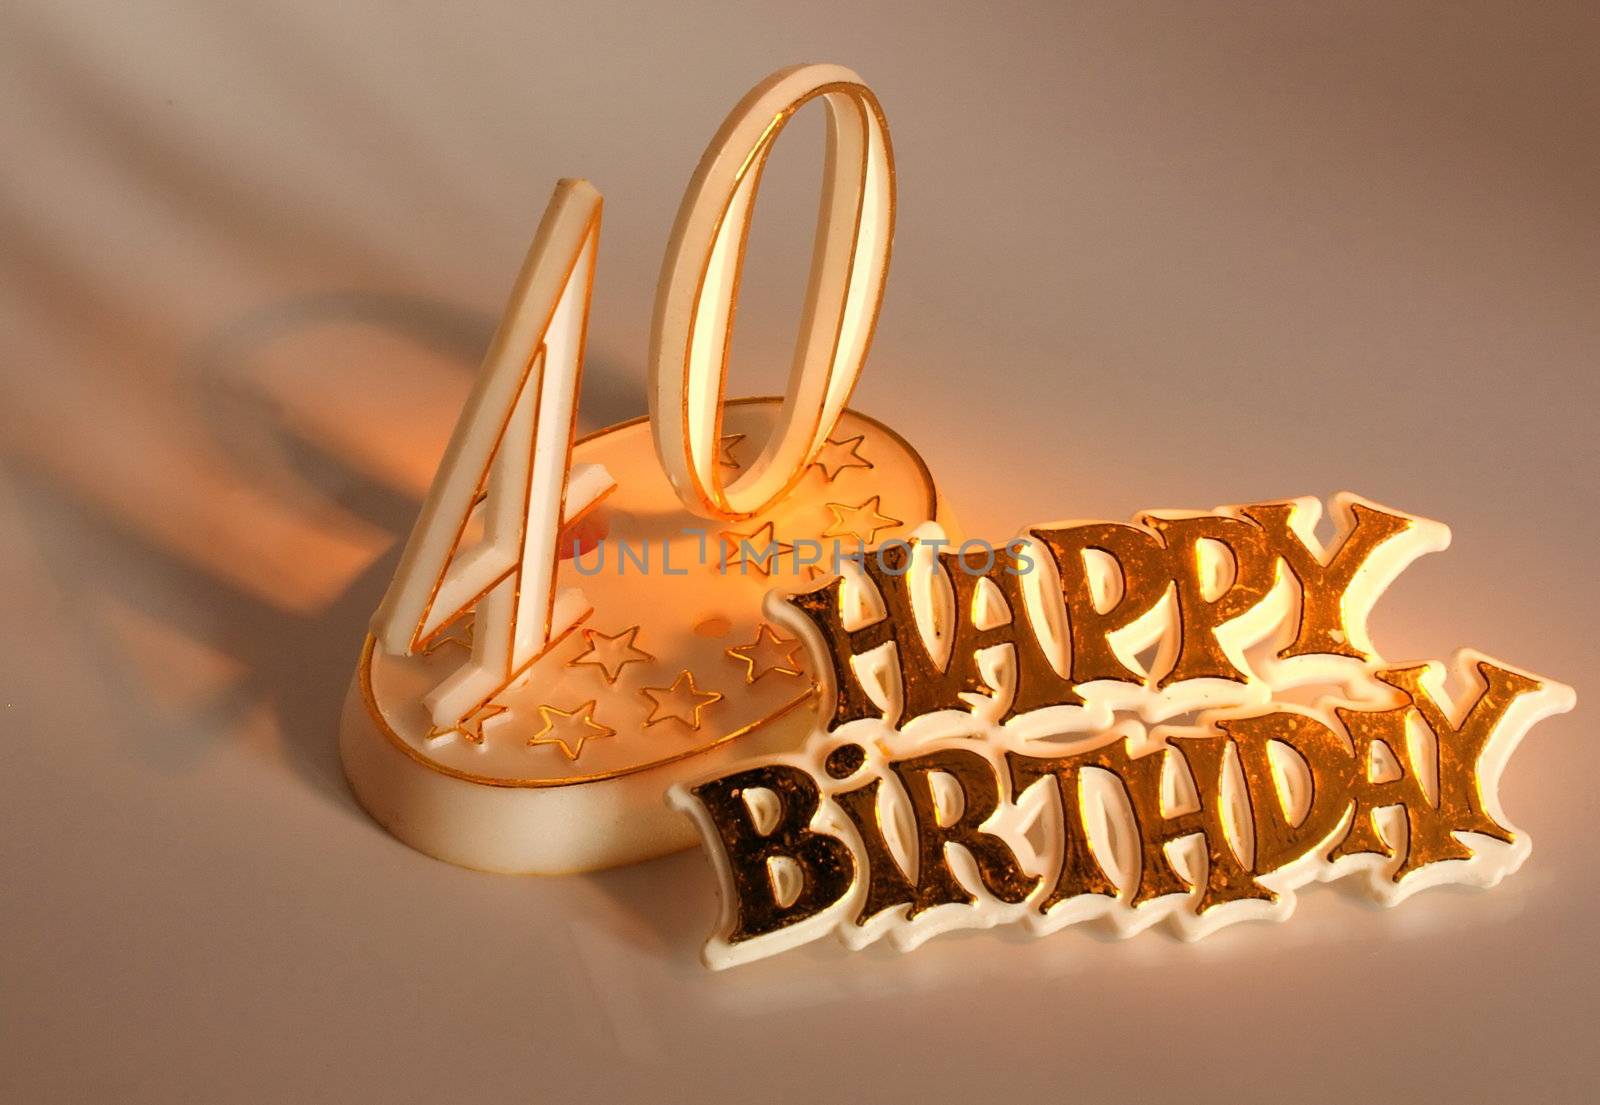 40th birthday sign lit with a torch light